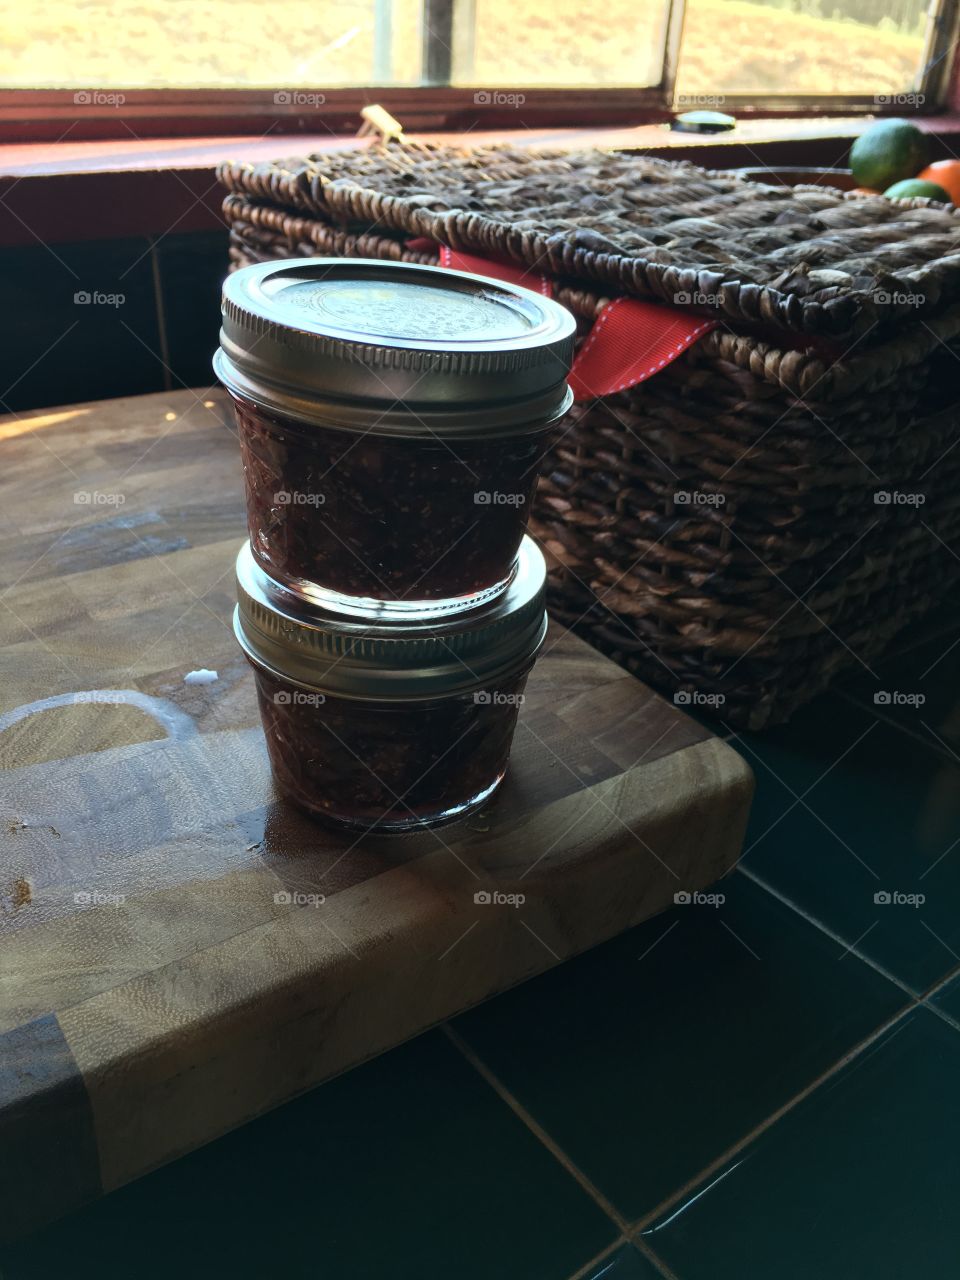 Homemade jam in a country kitchen. 
